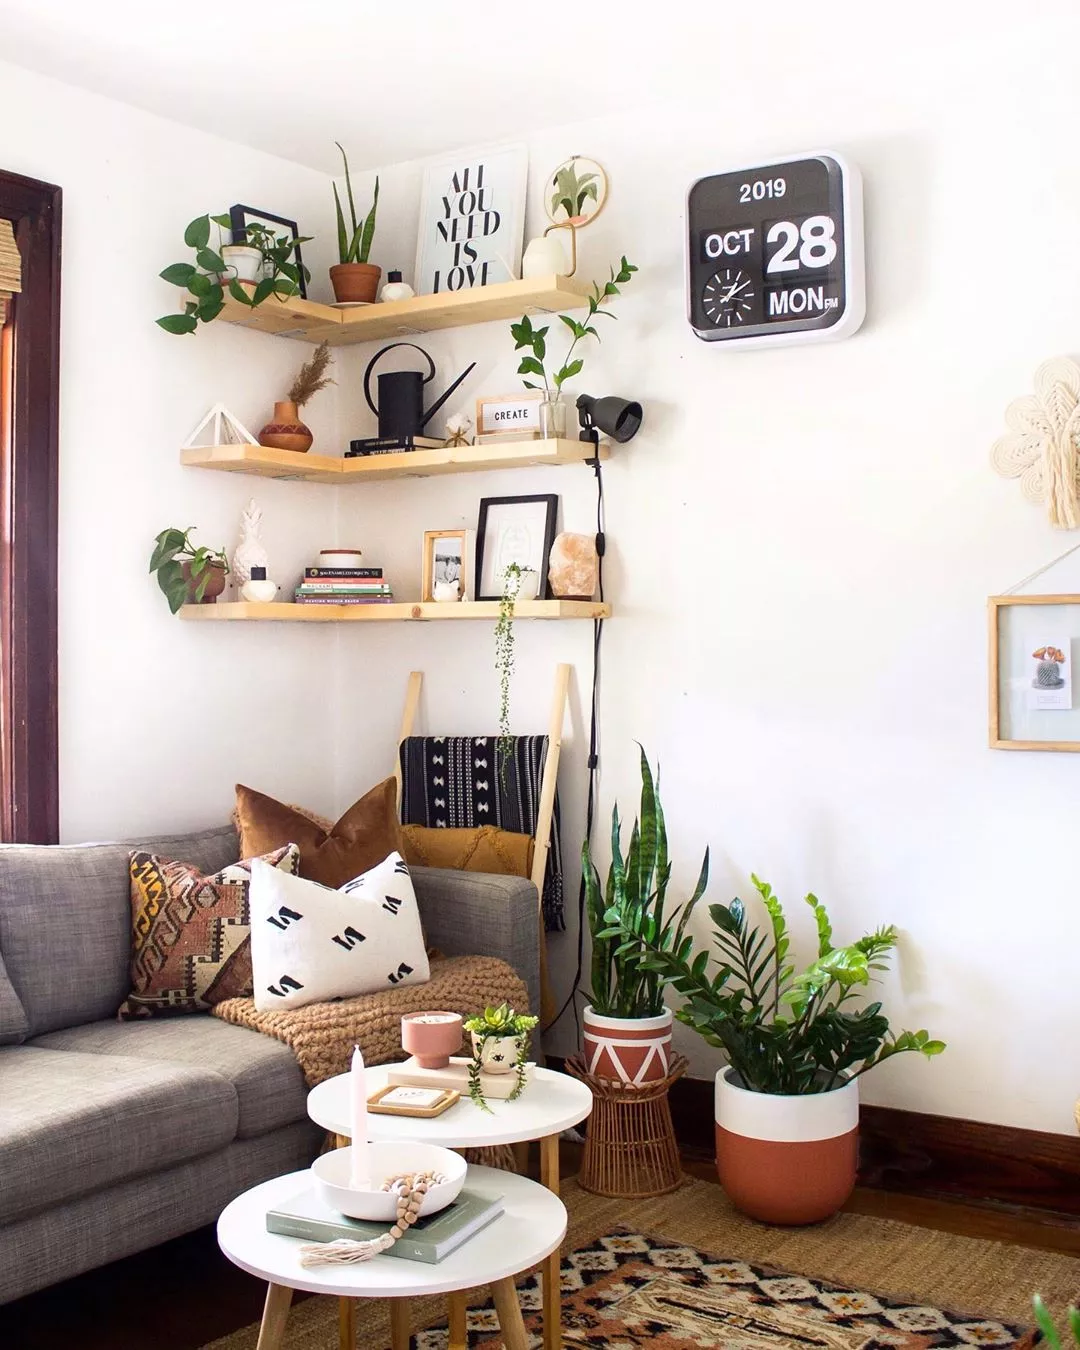 Organizing My Apartment {5 Rules For A Small Living Room} - Small